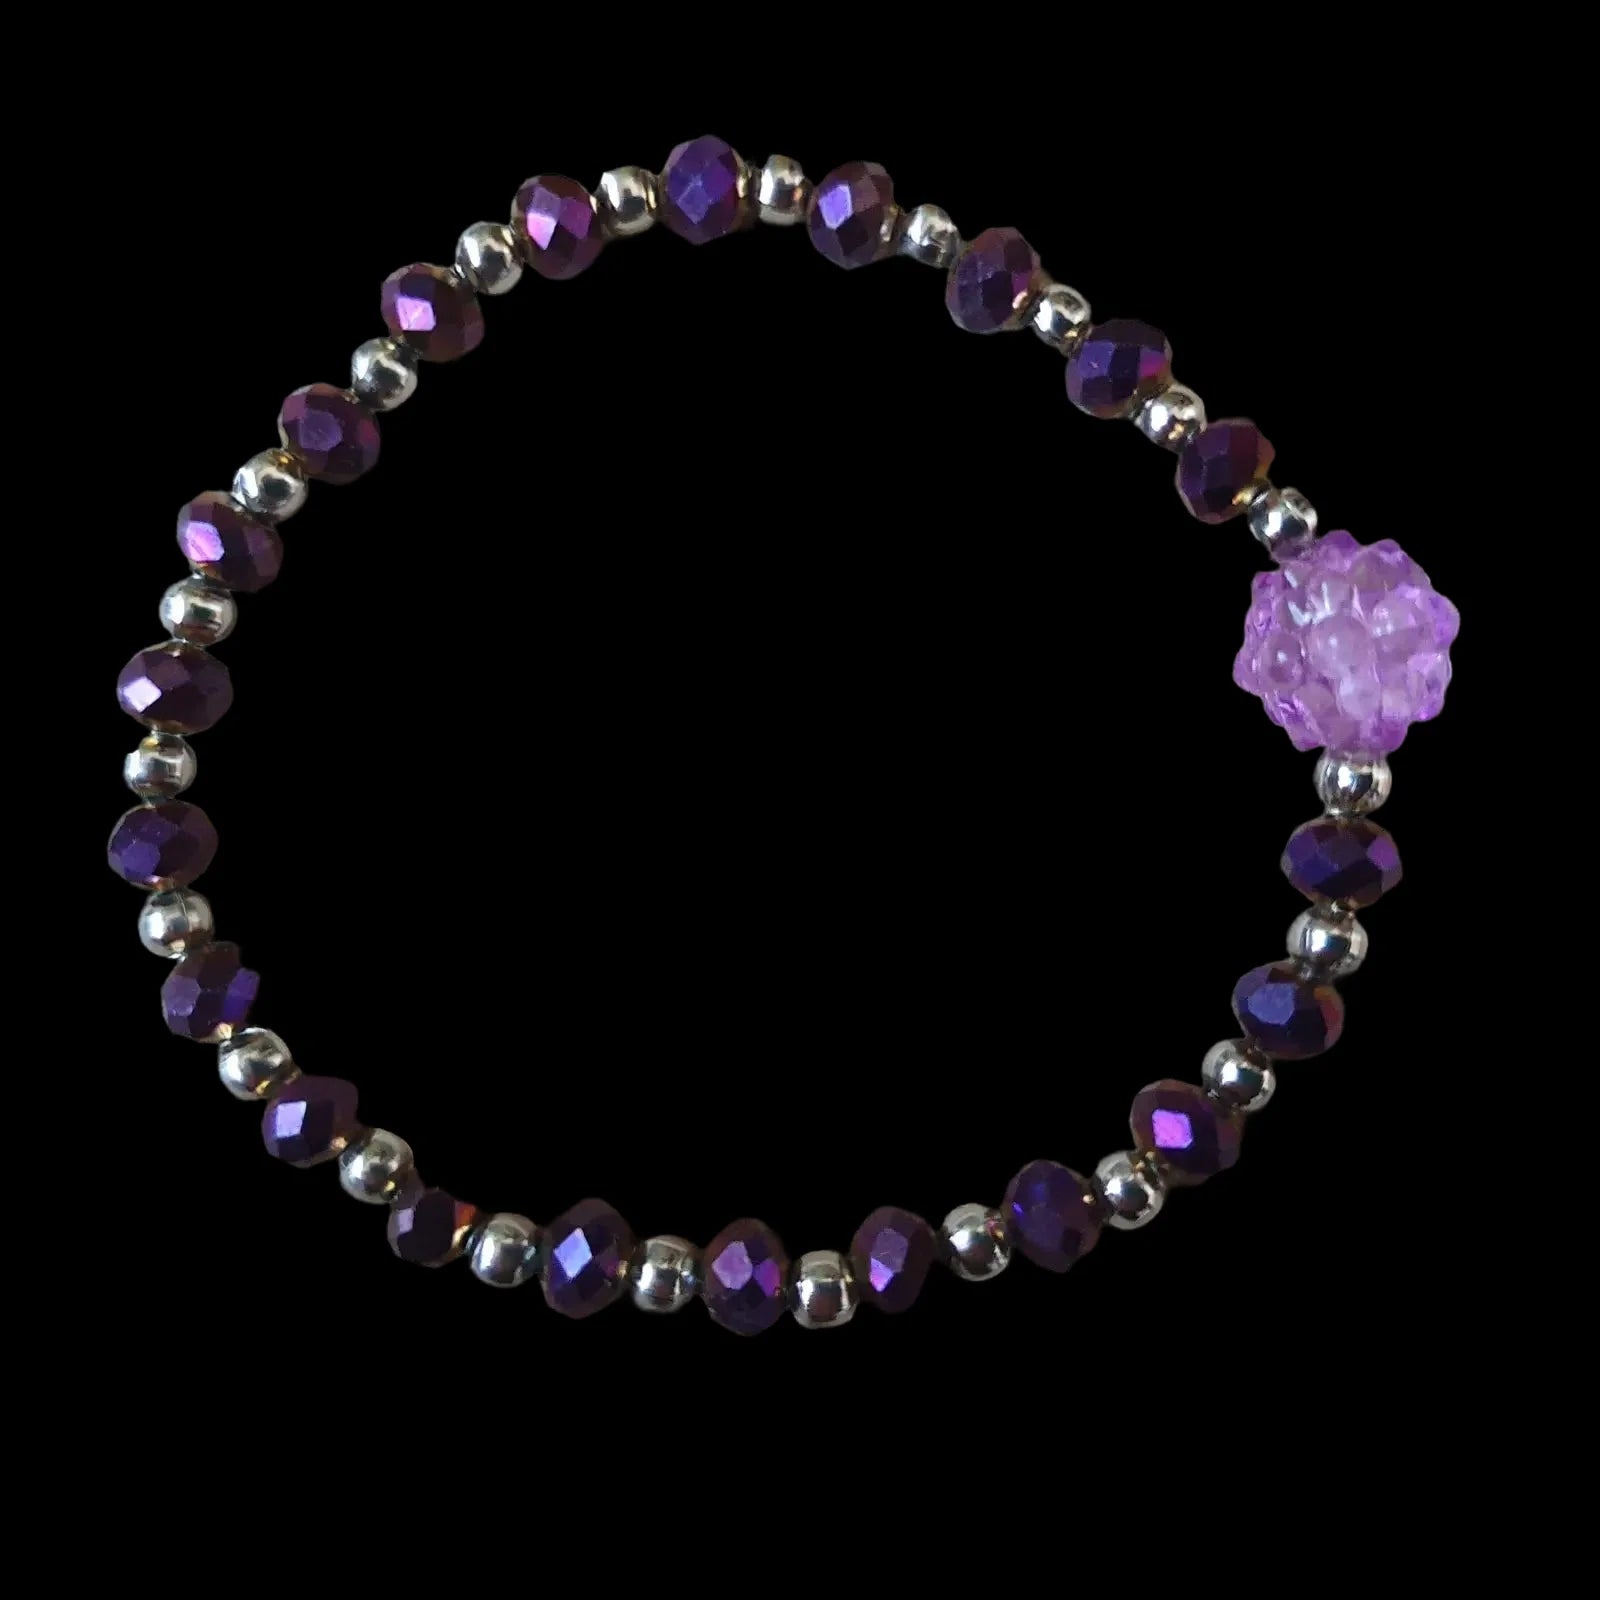 Unique Handmade Crafted Beaded Bracelet Purple Silver Gift